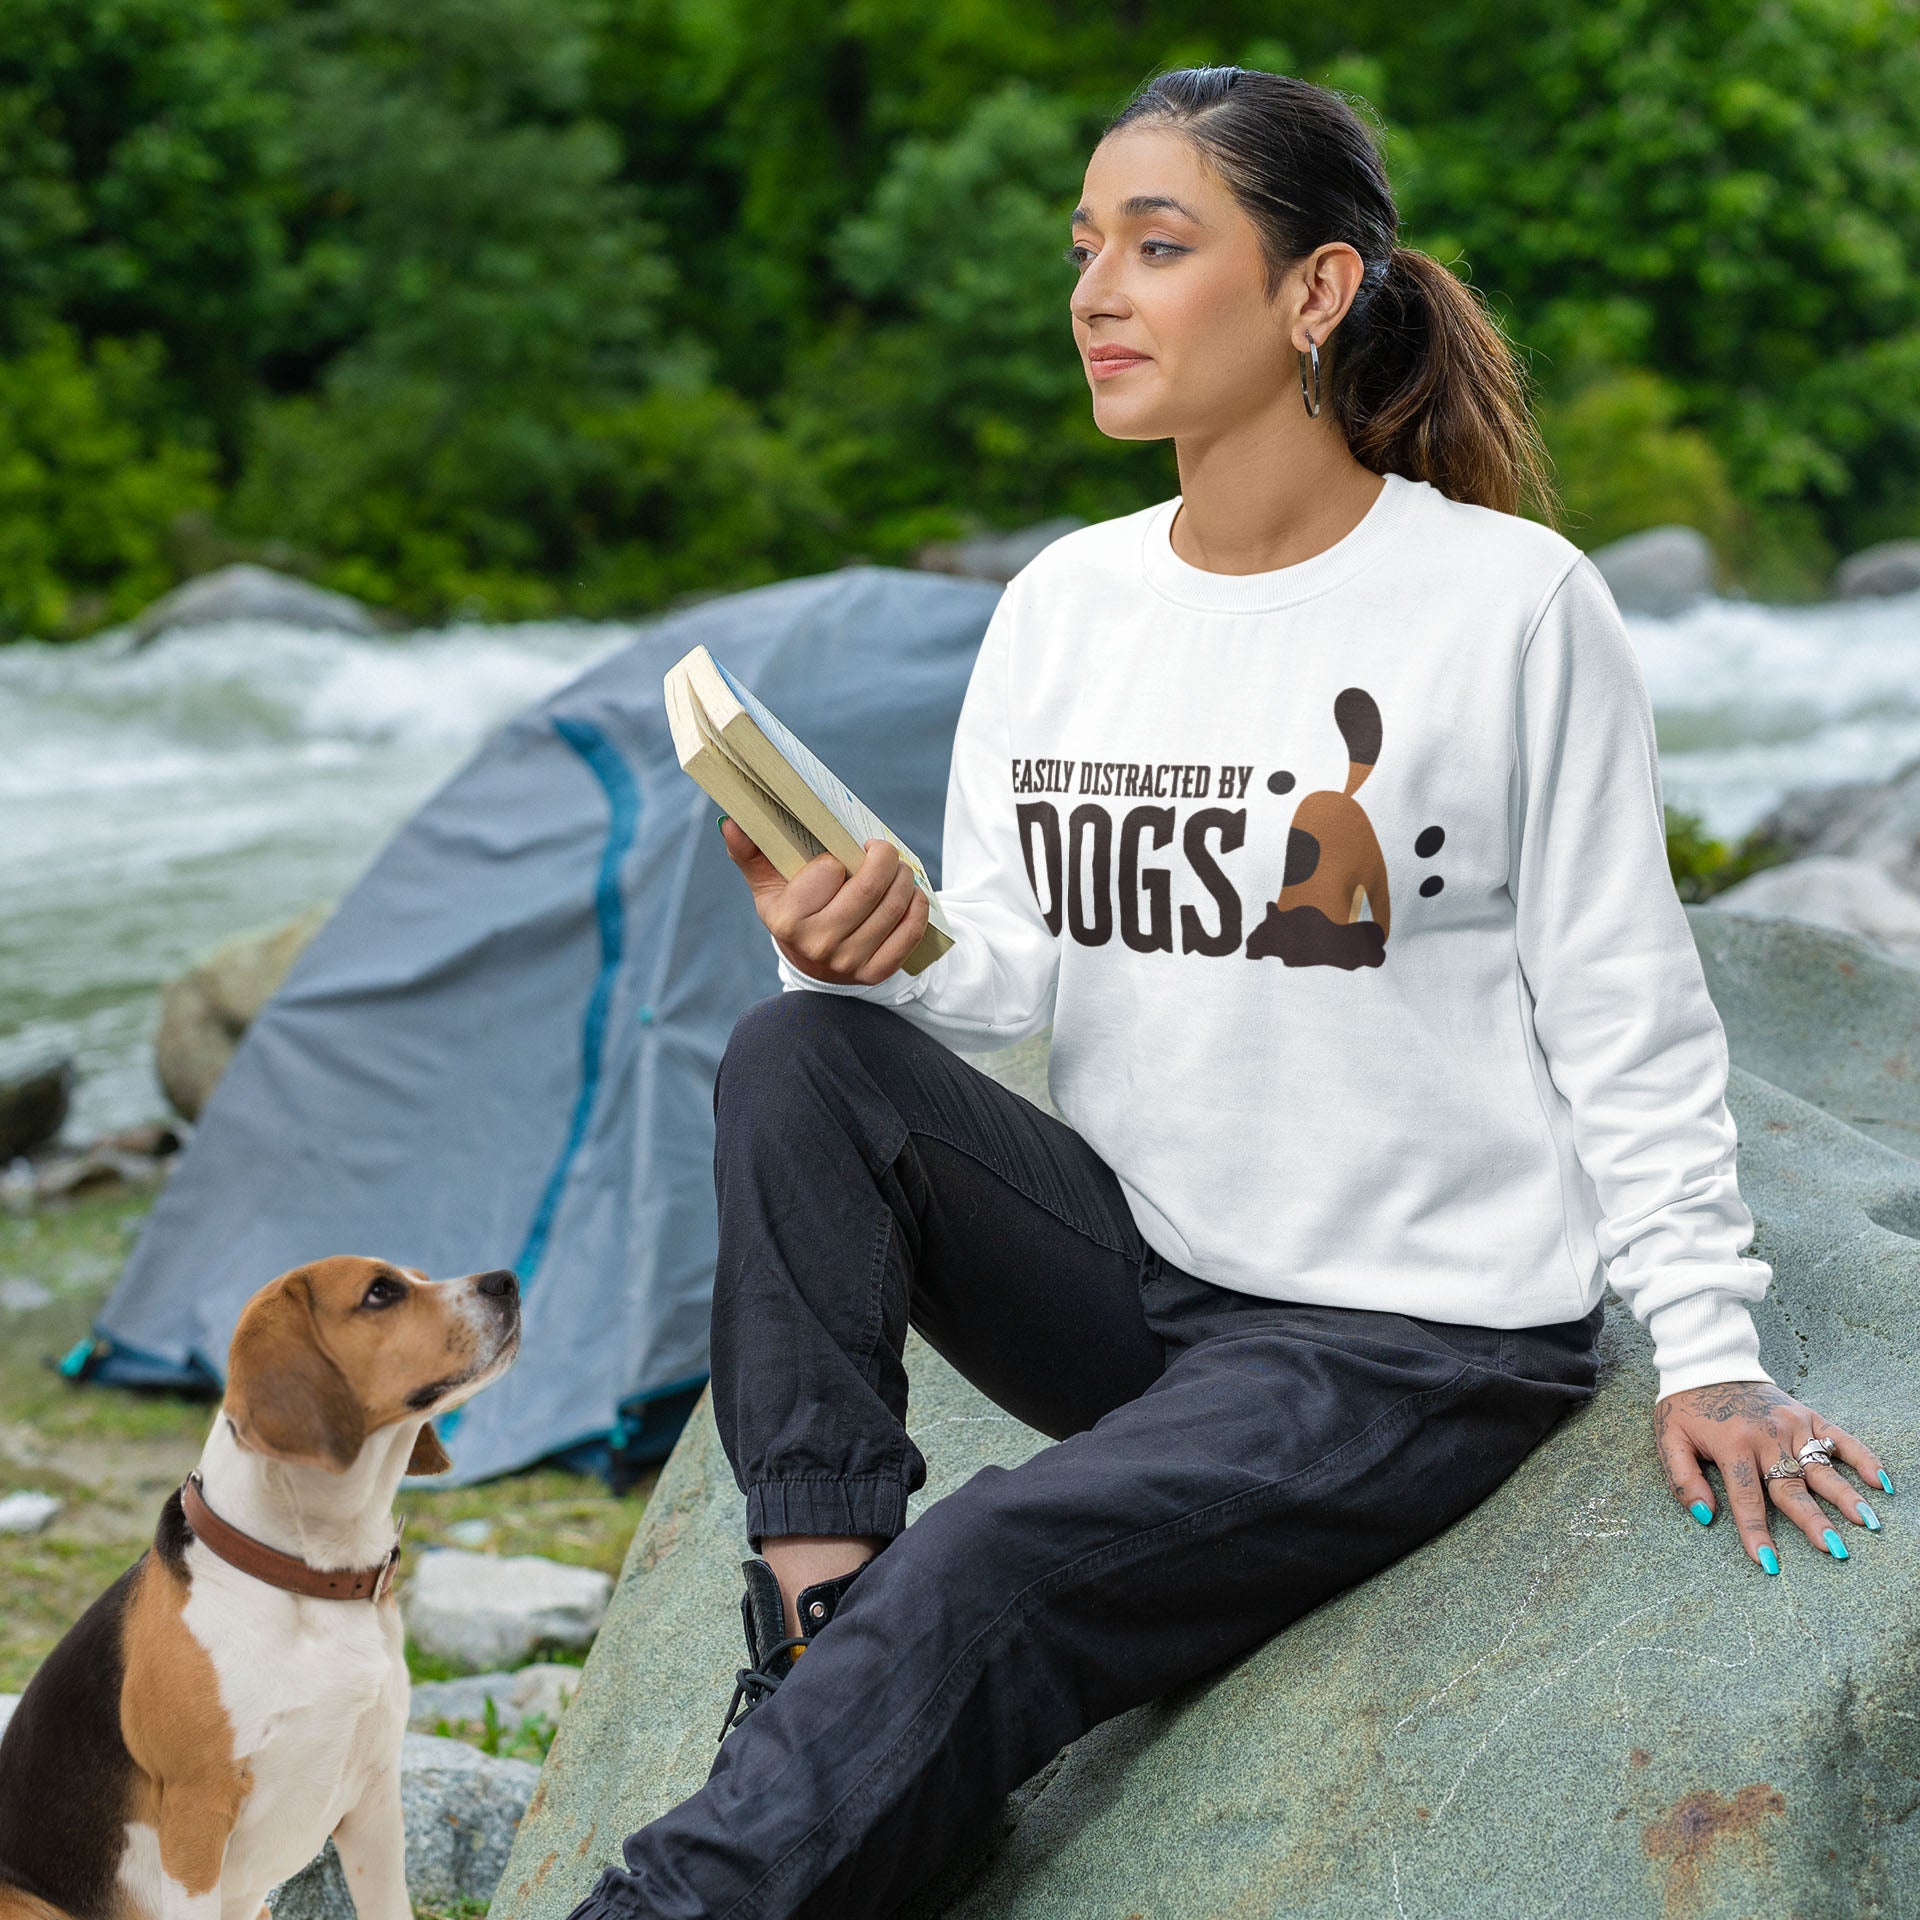  A woman, clad in a 'Dogs Pure Love, Easily Distracted by Dogs' white unisex sweatshirt, perches on a rock with a book in hand, while her Beagle sits admirably in front of her, gazing up. In the background, a tent stands near a tranquil riverbed.